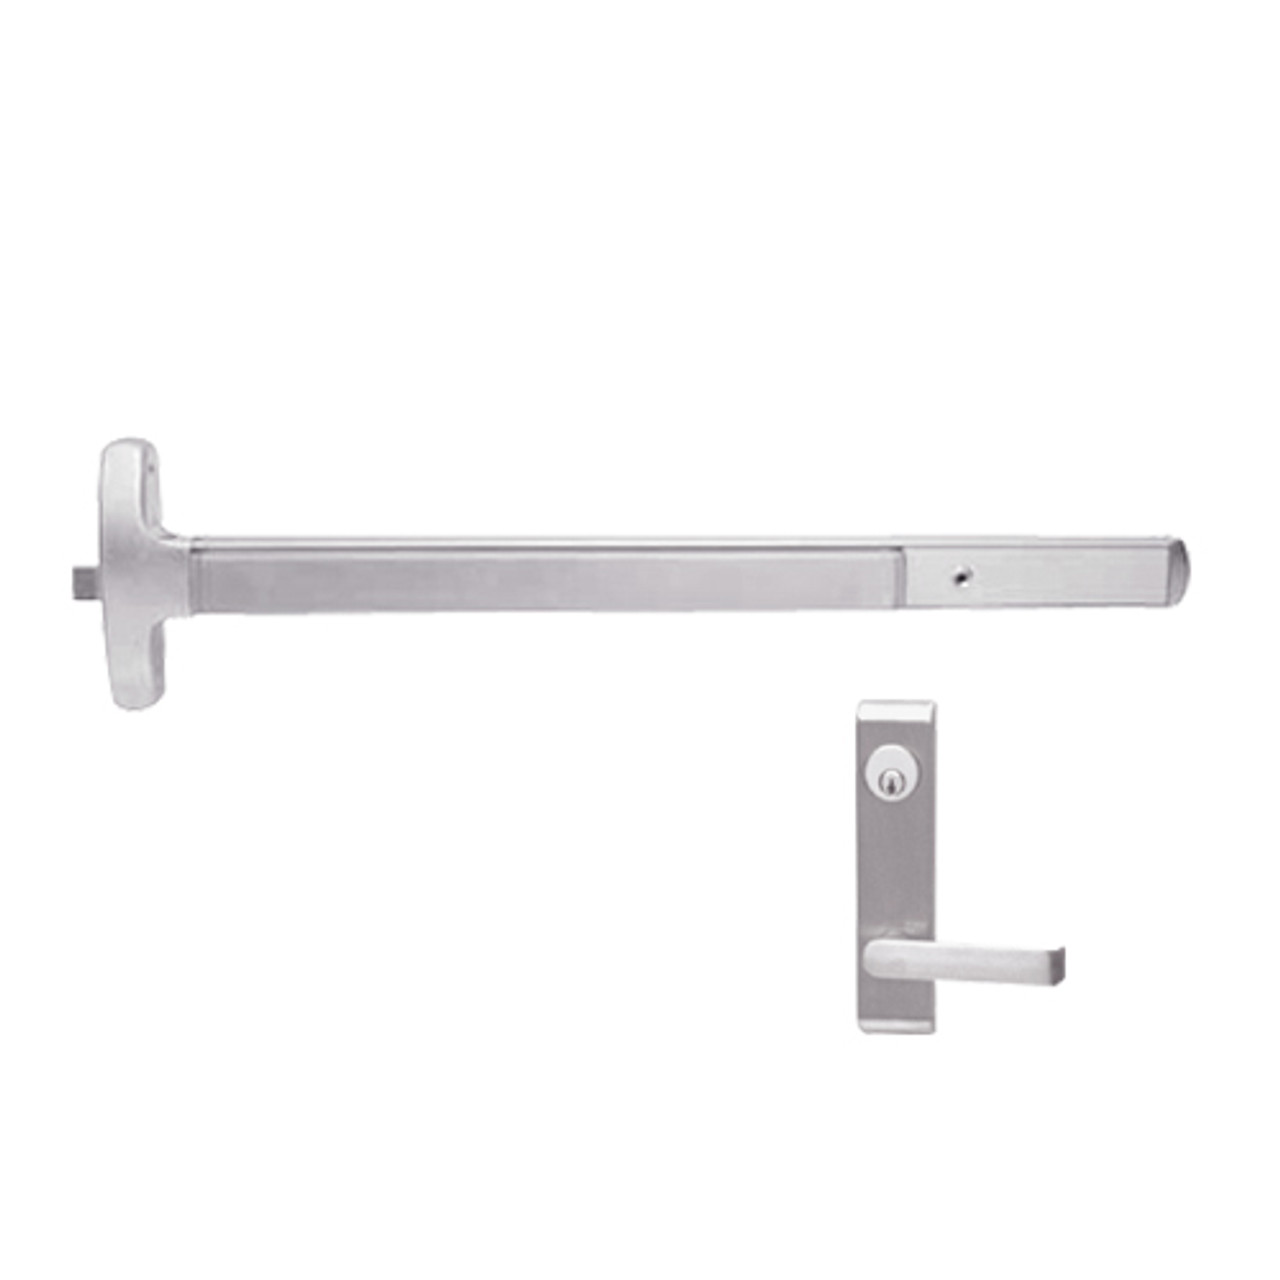 24-R-L-NL-DANE-US32-3-RHR Falcon Exit Device in Polished Stainless Steel